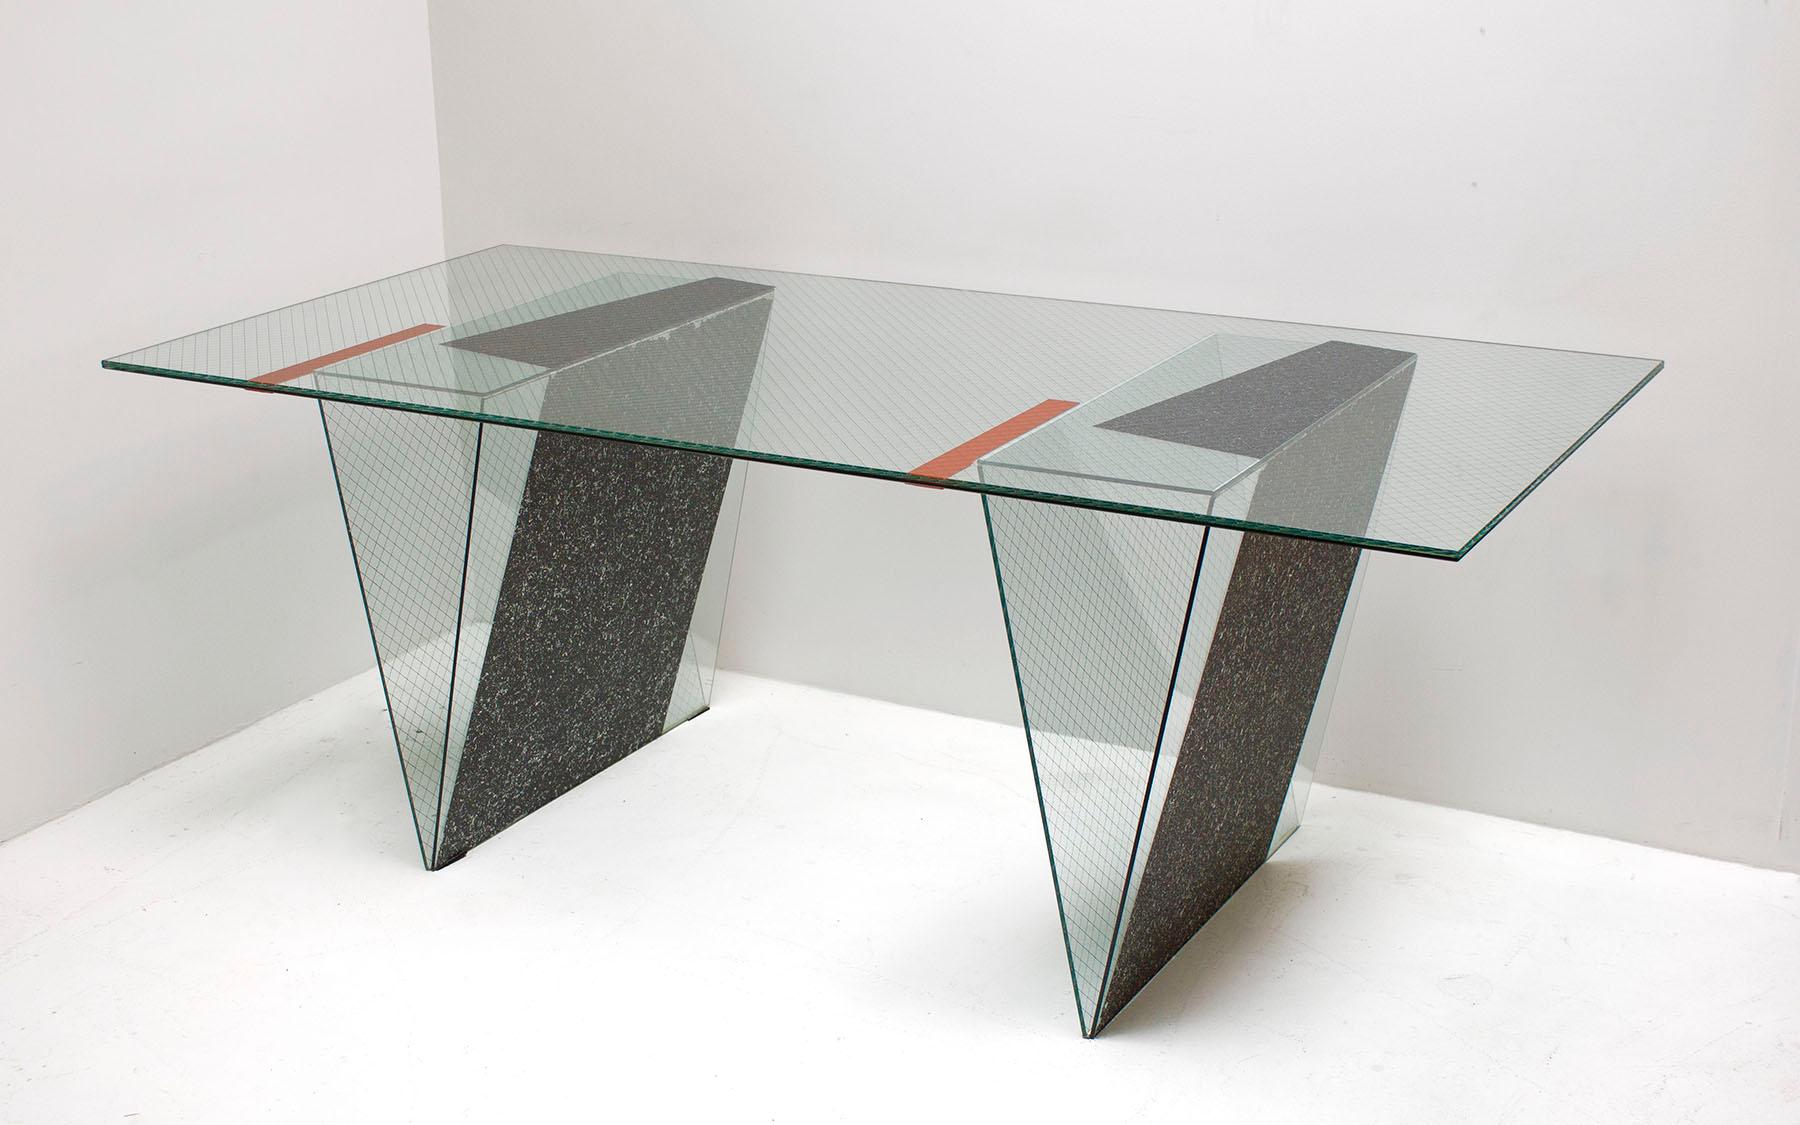 This rare glass executive desk was designed by world famous architect Robert Mangurian and is a one-of-a-kind - never put into production design. It was the personal desk of Lorry Parks Dudley, who was the founder of the Ettore Sottsass-designed